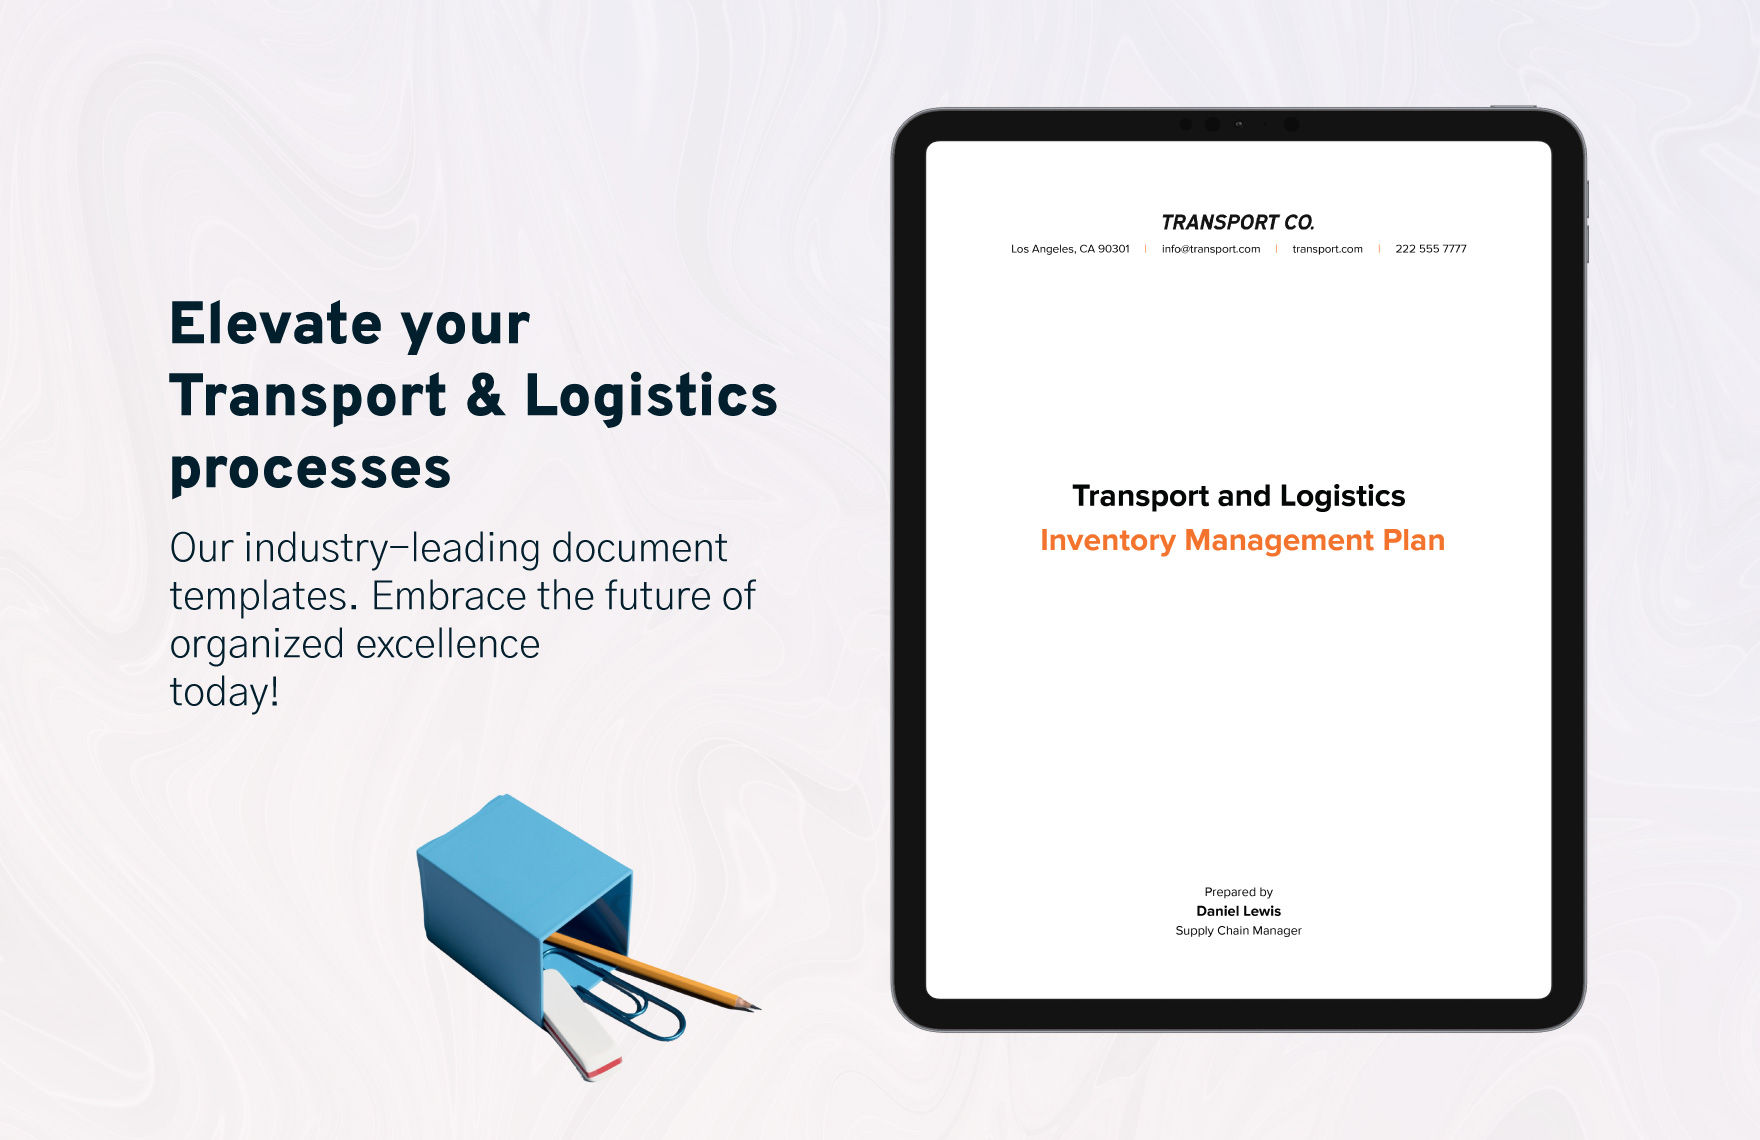 Transport and Logistics Inventory Management Plan Template